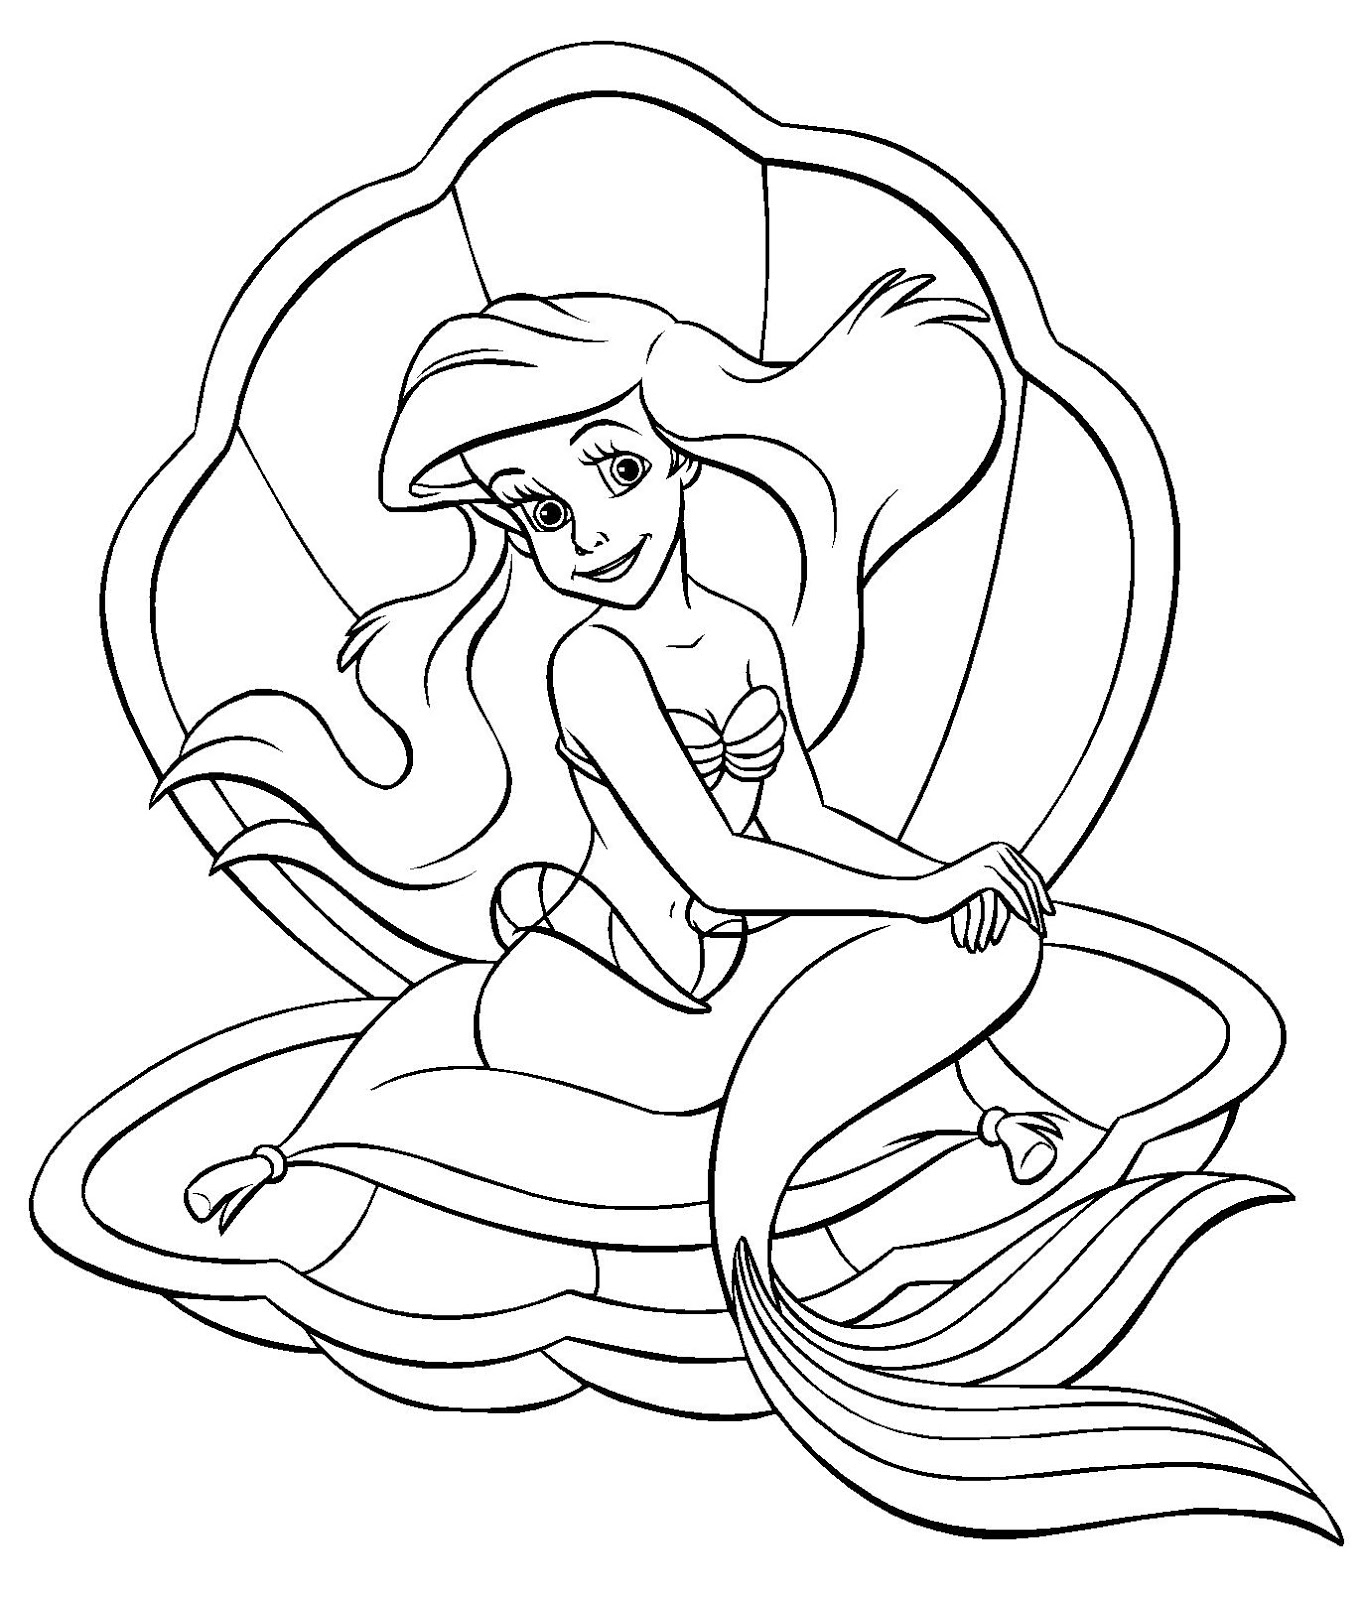 Free Disney Coloring Pages To Print